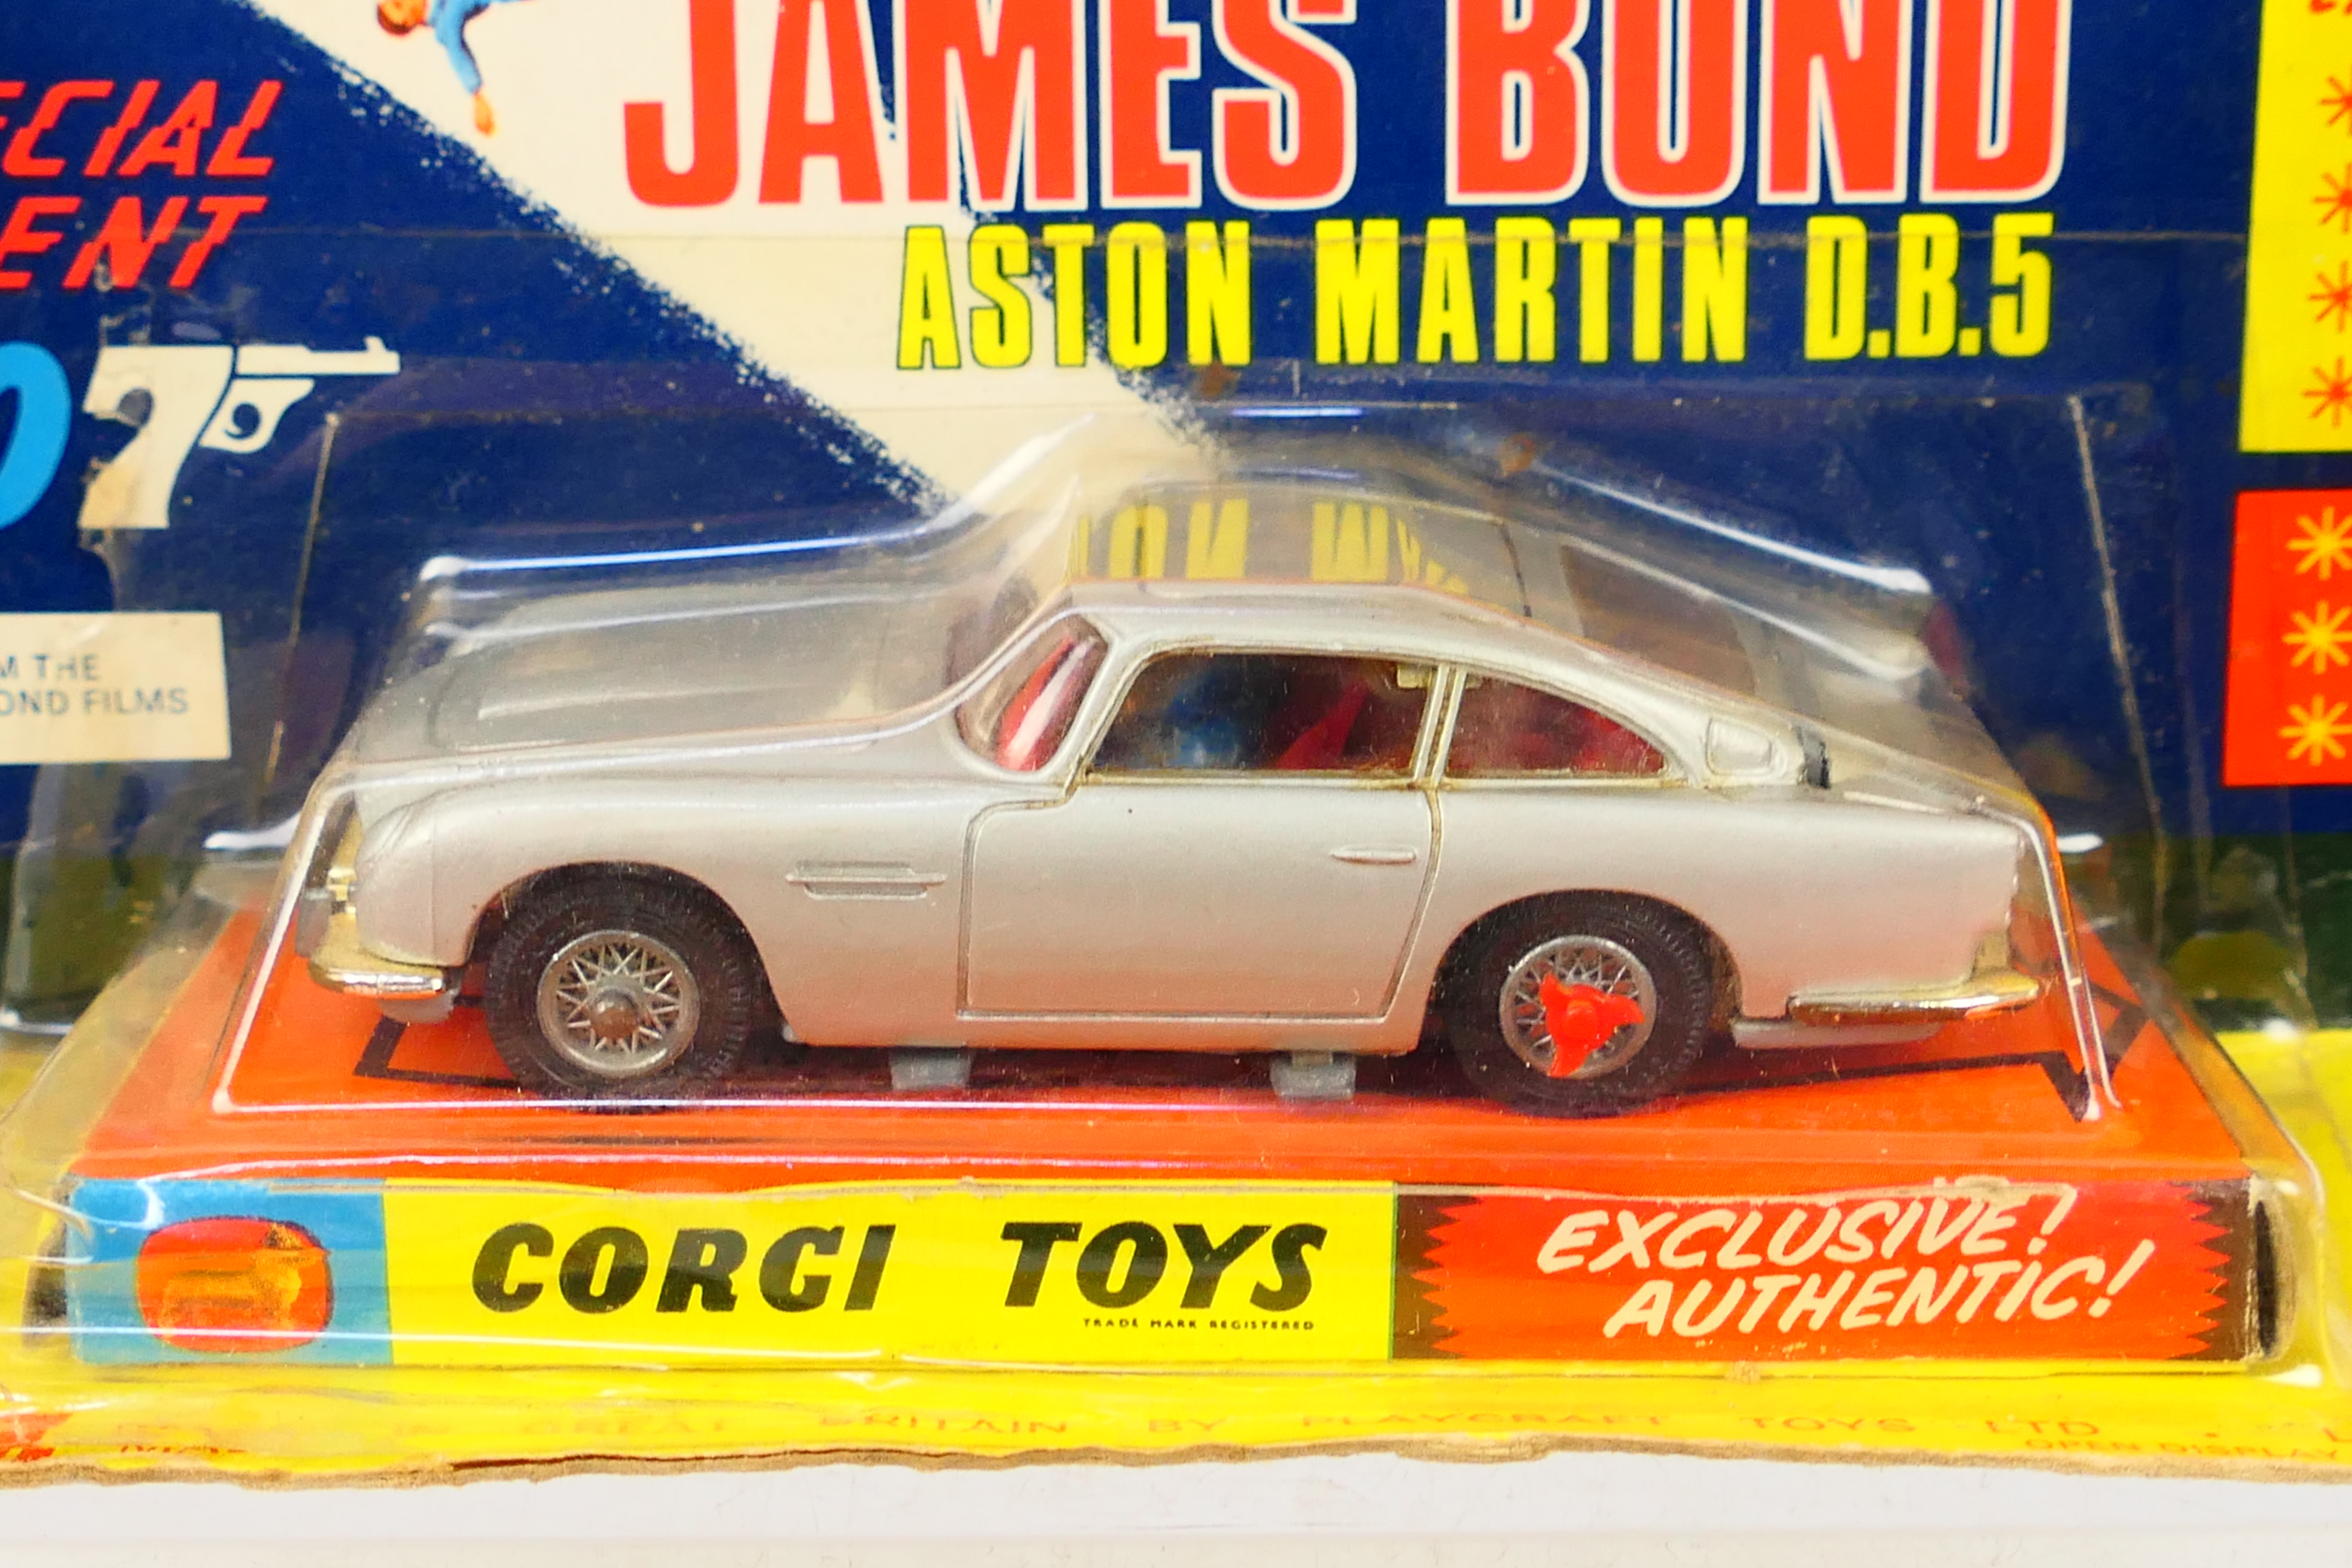 Corgi - James Bond - An unopened 007 Aston Martin DB5 in the early pictorial wing flap packaging # - Image 2 of 8